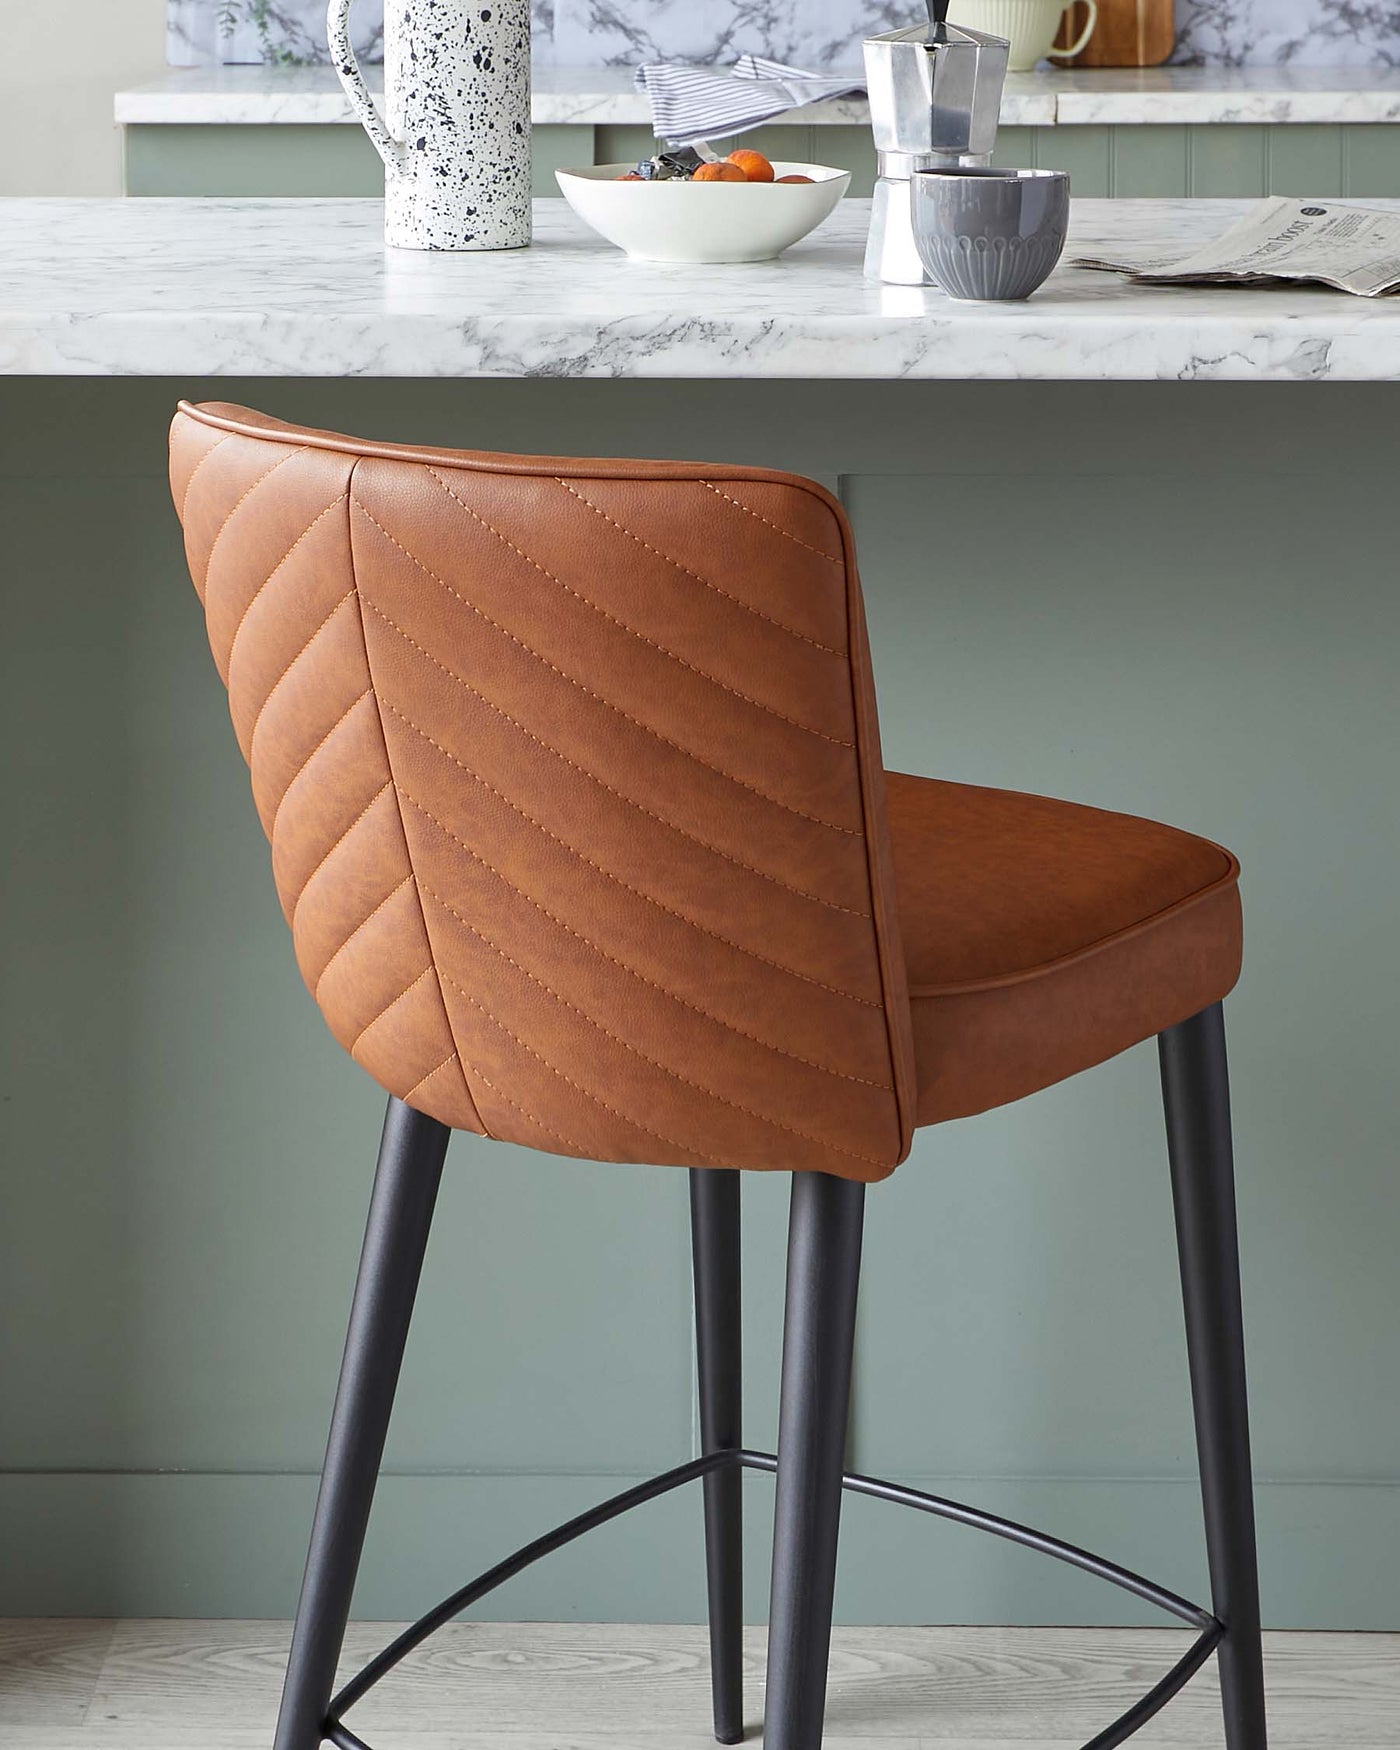 Elegant modern bar stool with a quilted, caramel-coloured faux leather seat and a minimalist black metal frame, displayed in front of a kitchen countertop.